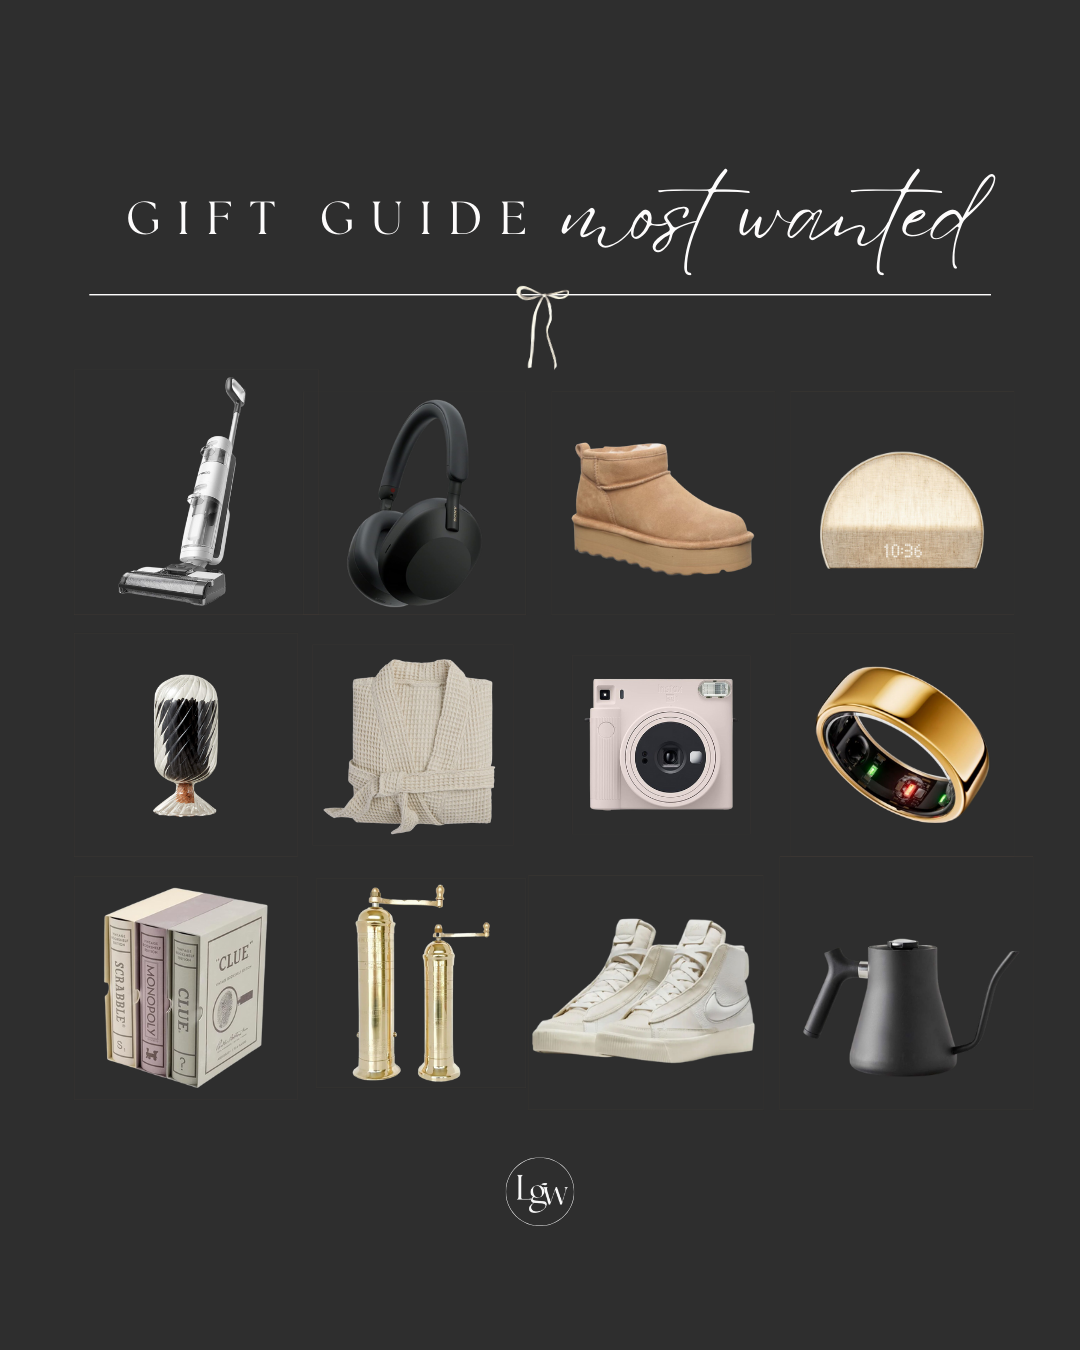 Gift Guide Most Wanted